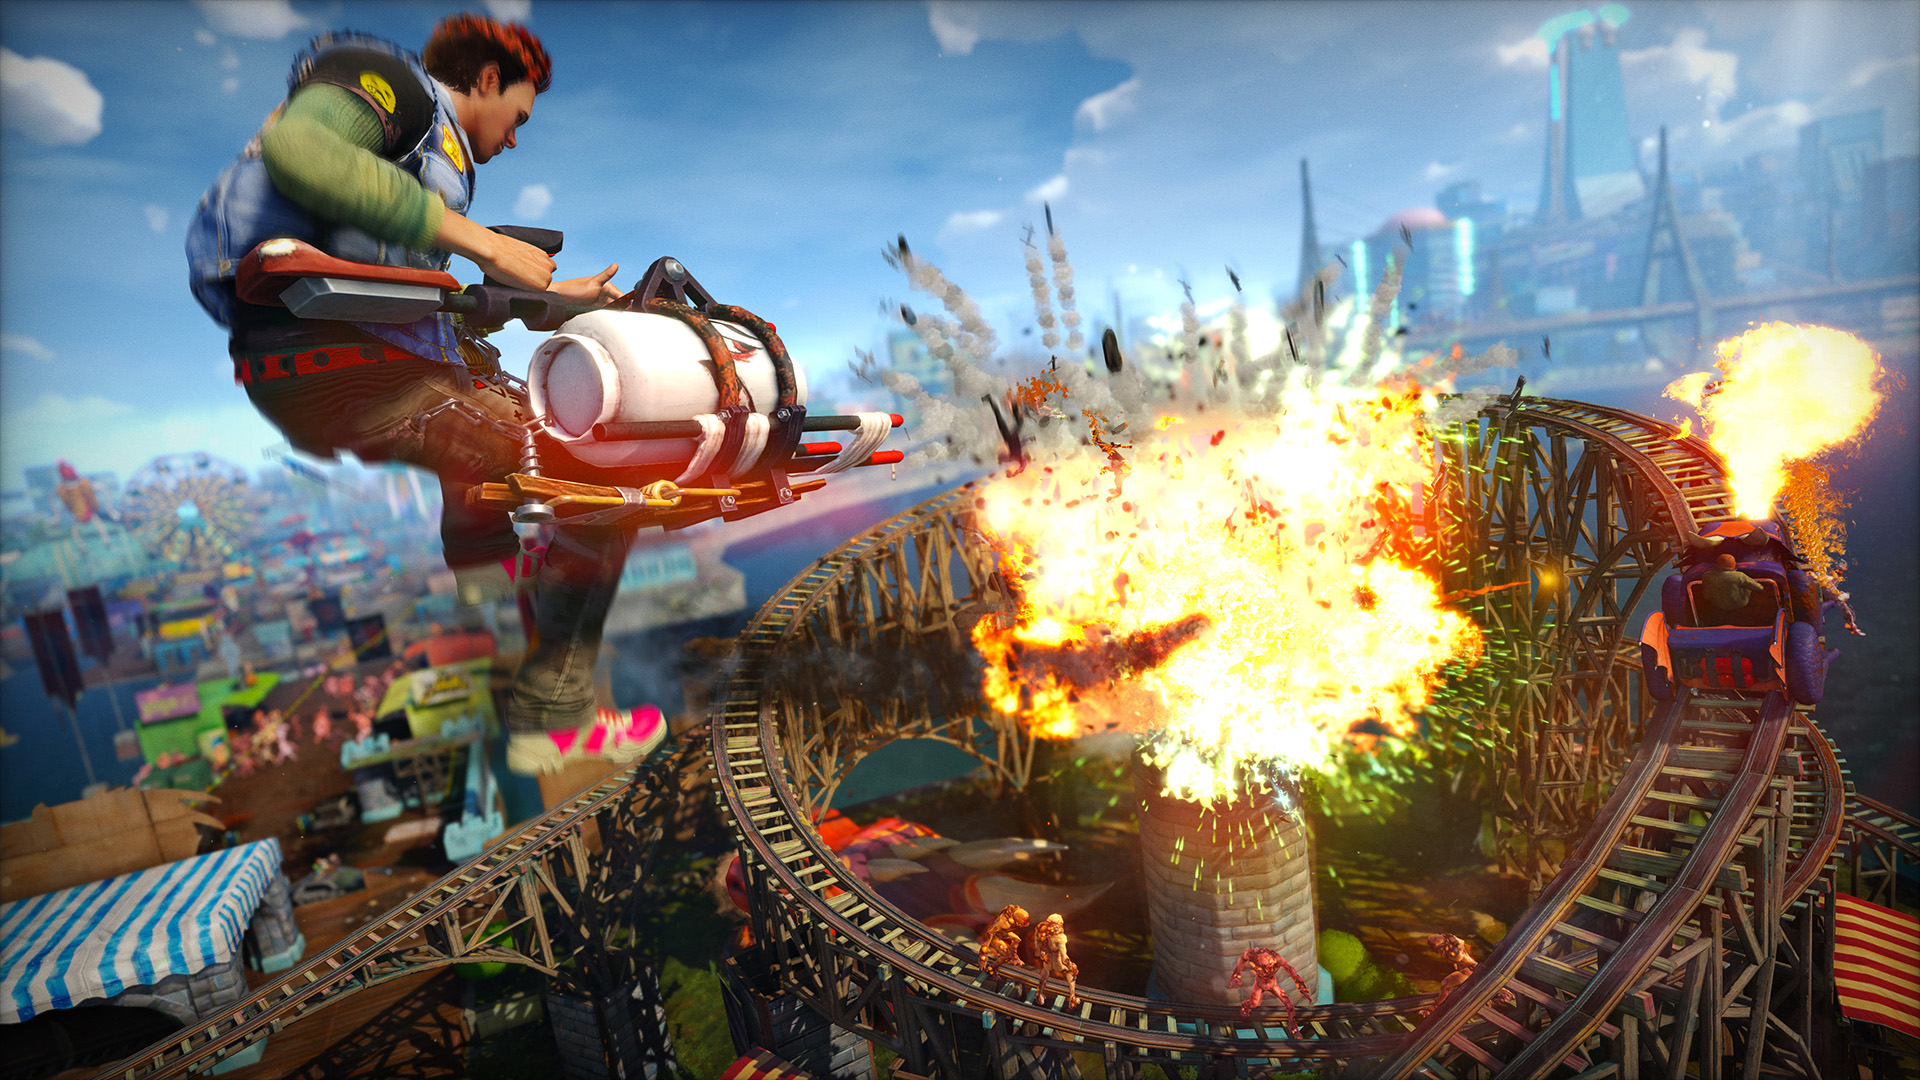 sunset overdrive release date